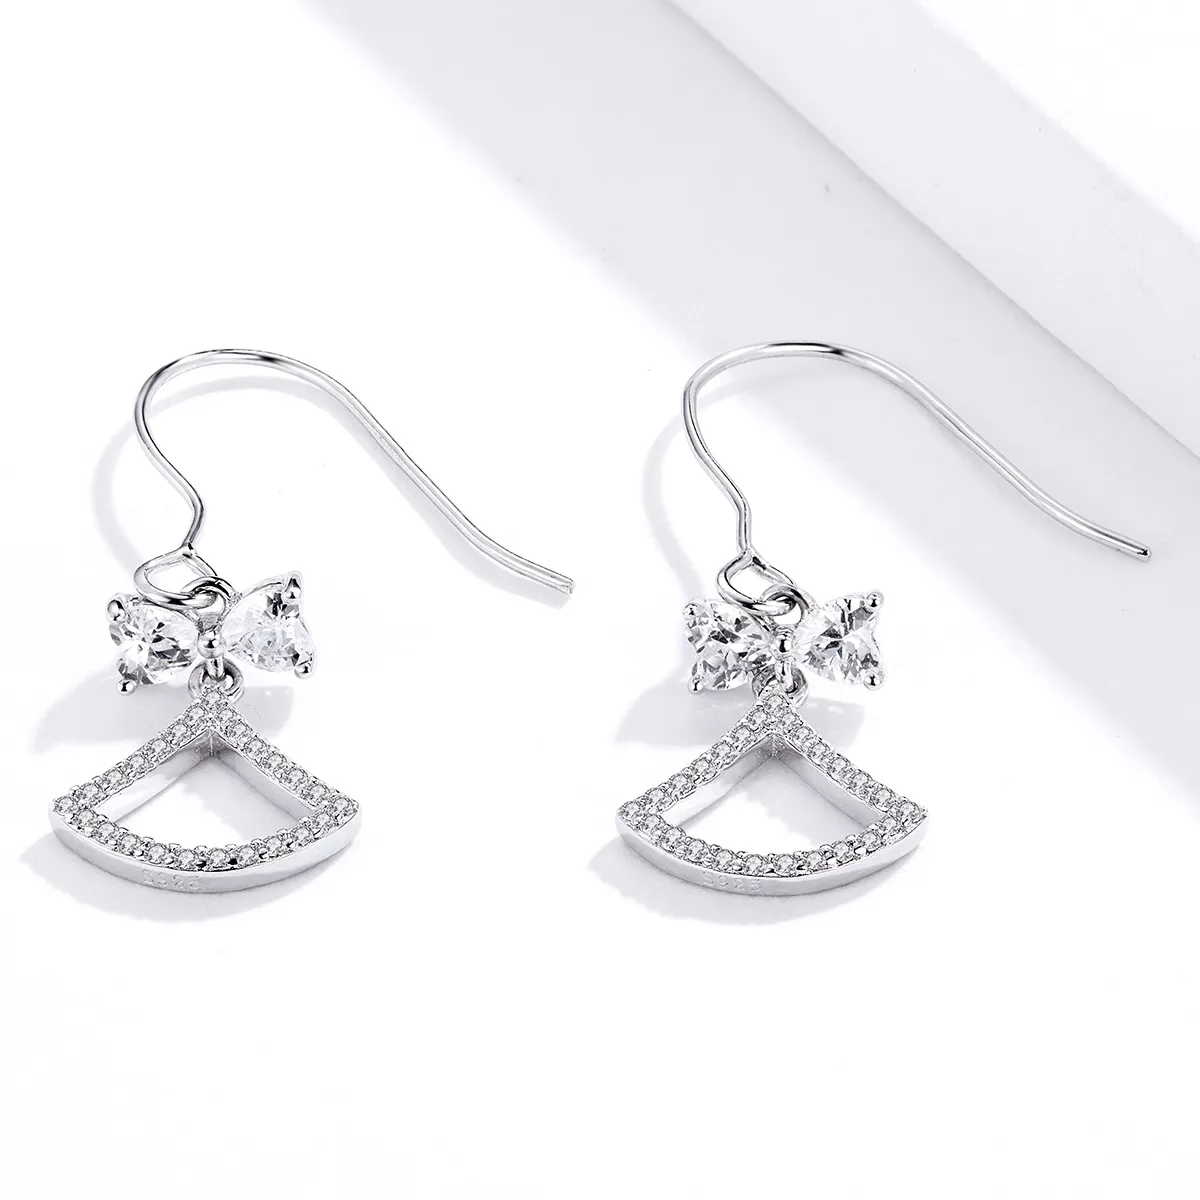 Pandora Style Bow Scalloped Hanging Earrings - BSE281